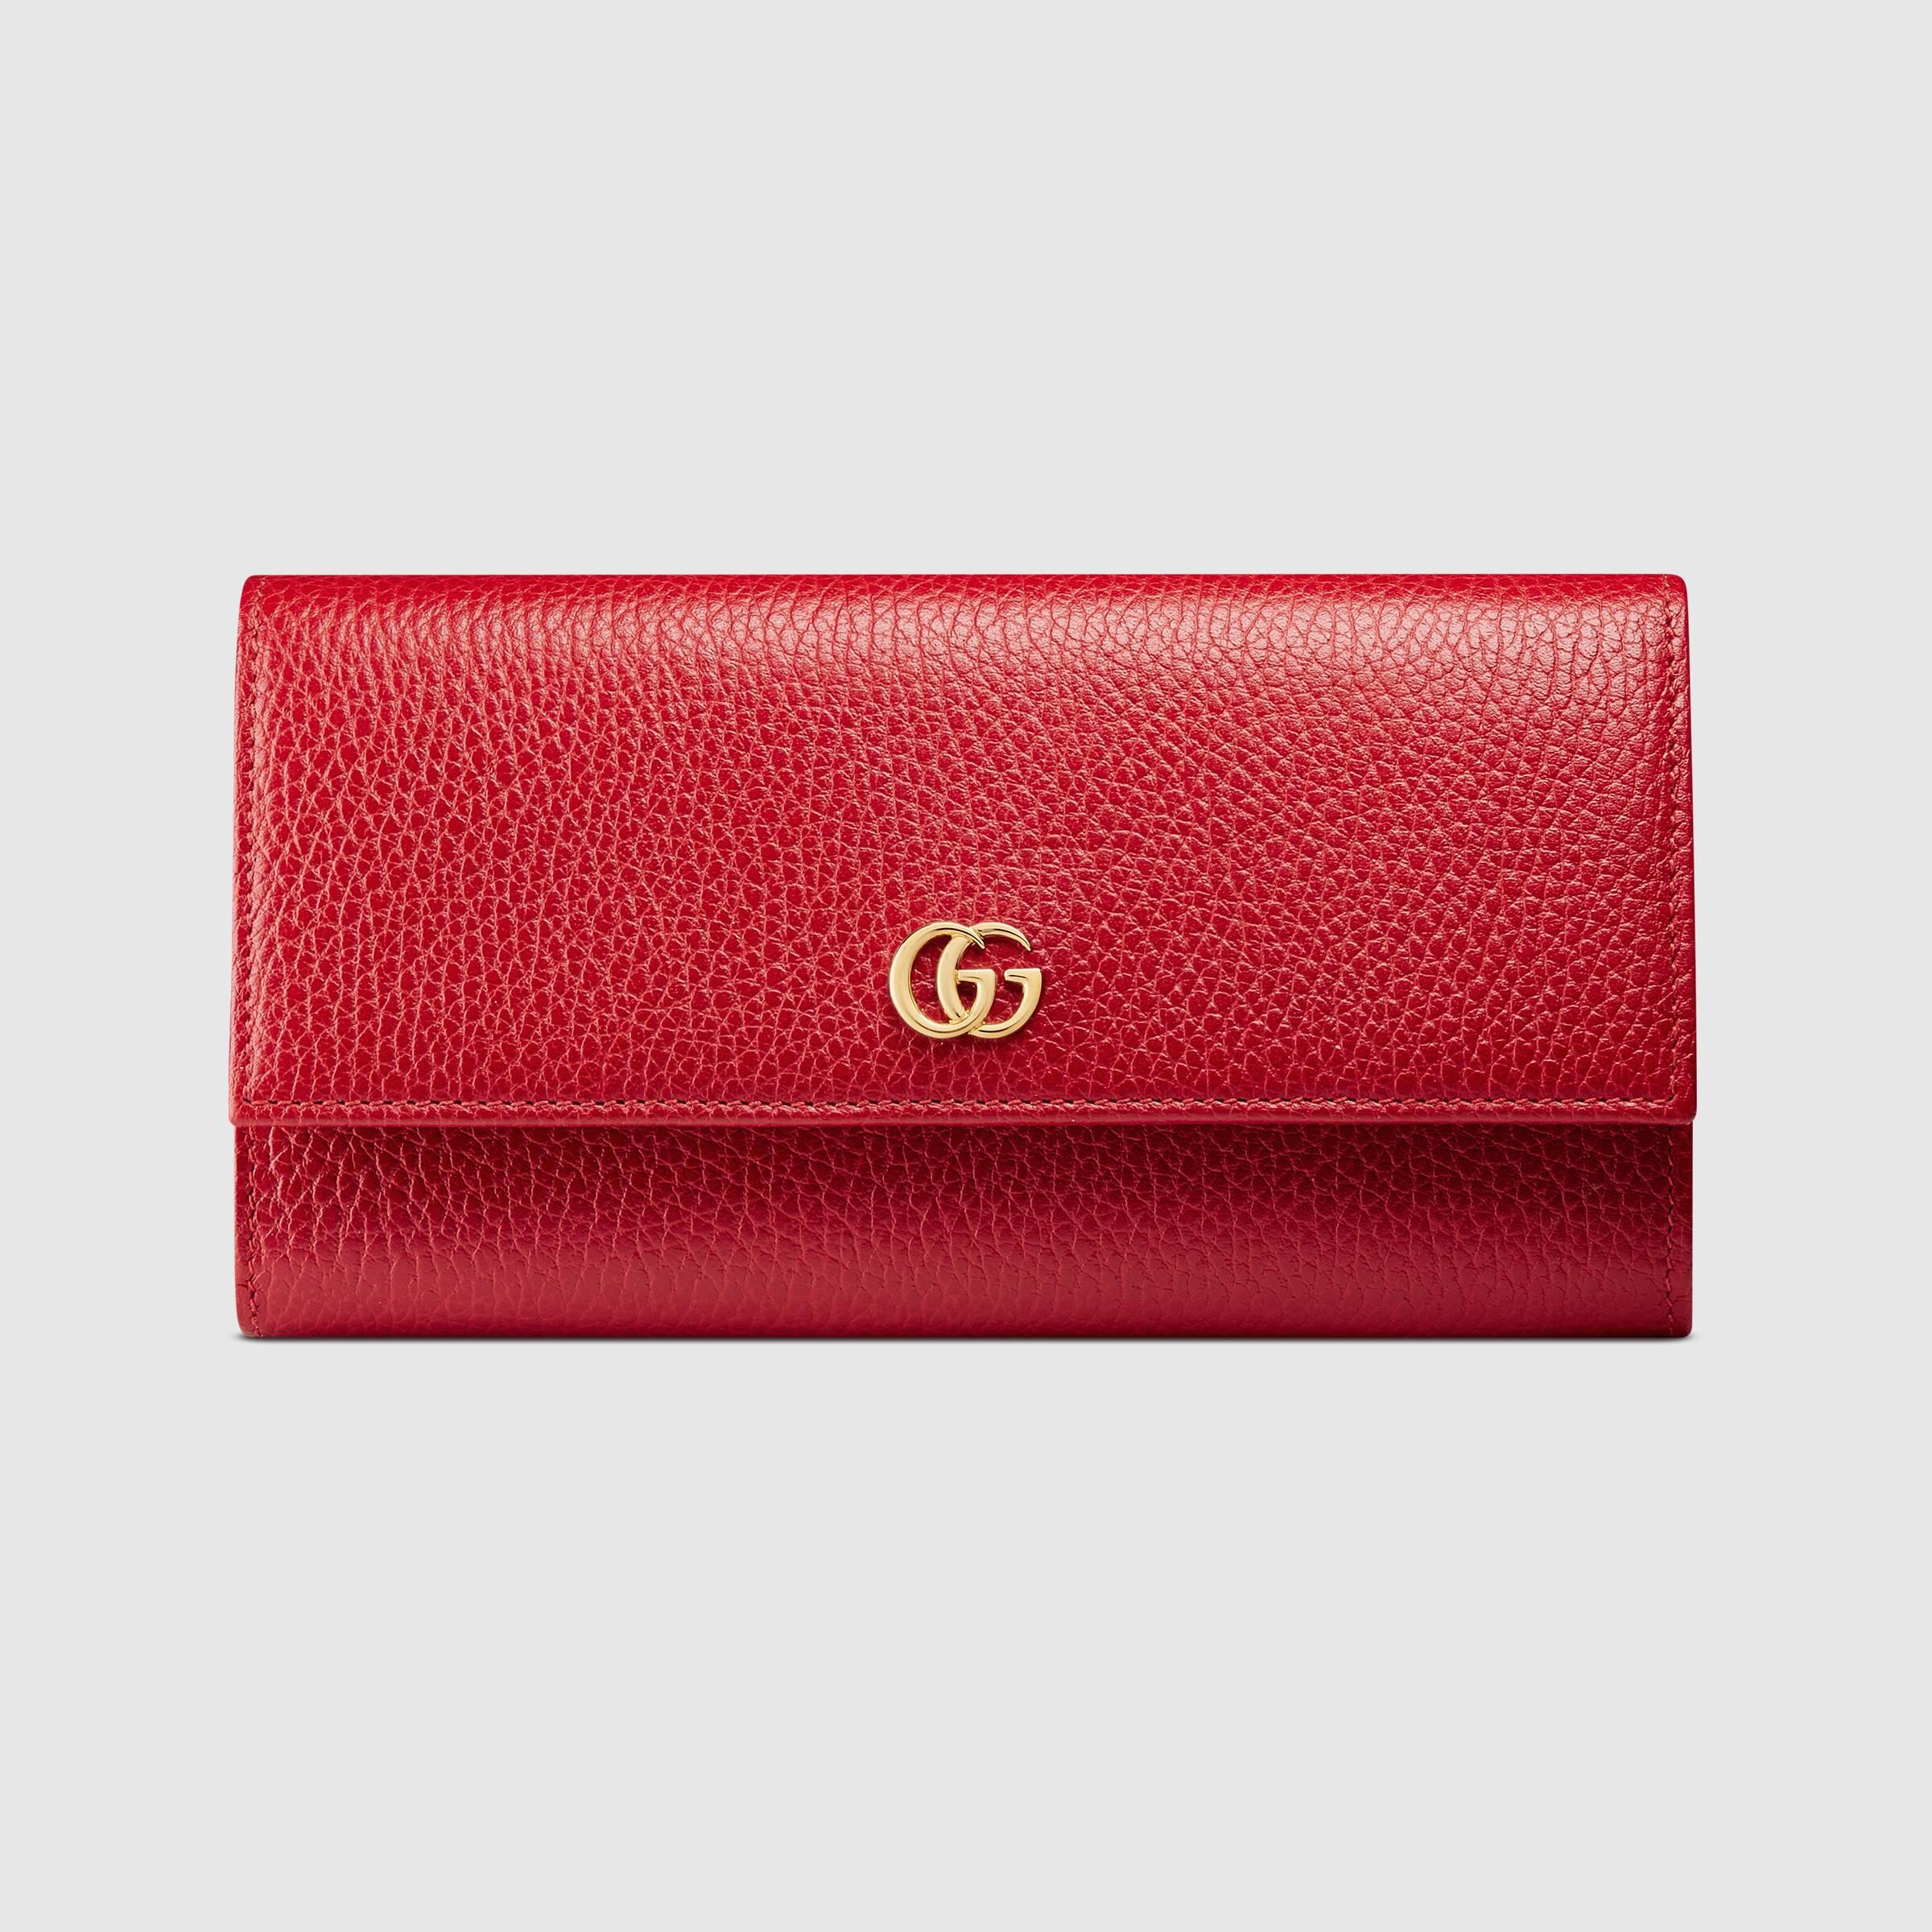 Gucci Leather Continental Wallet in Red - Save 33% - Lyst